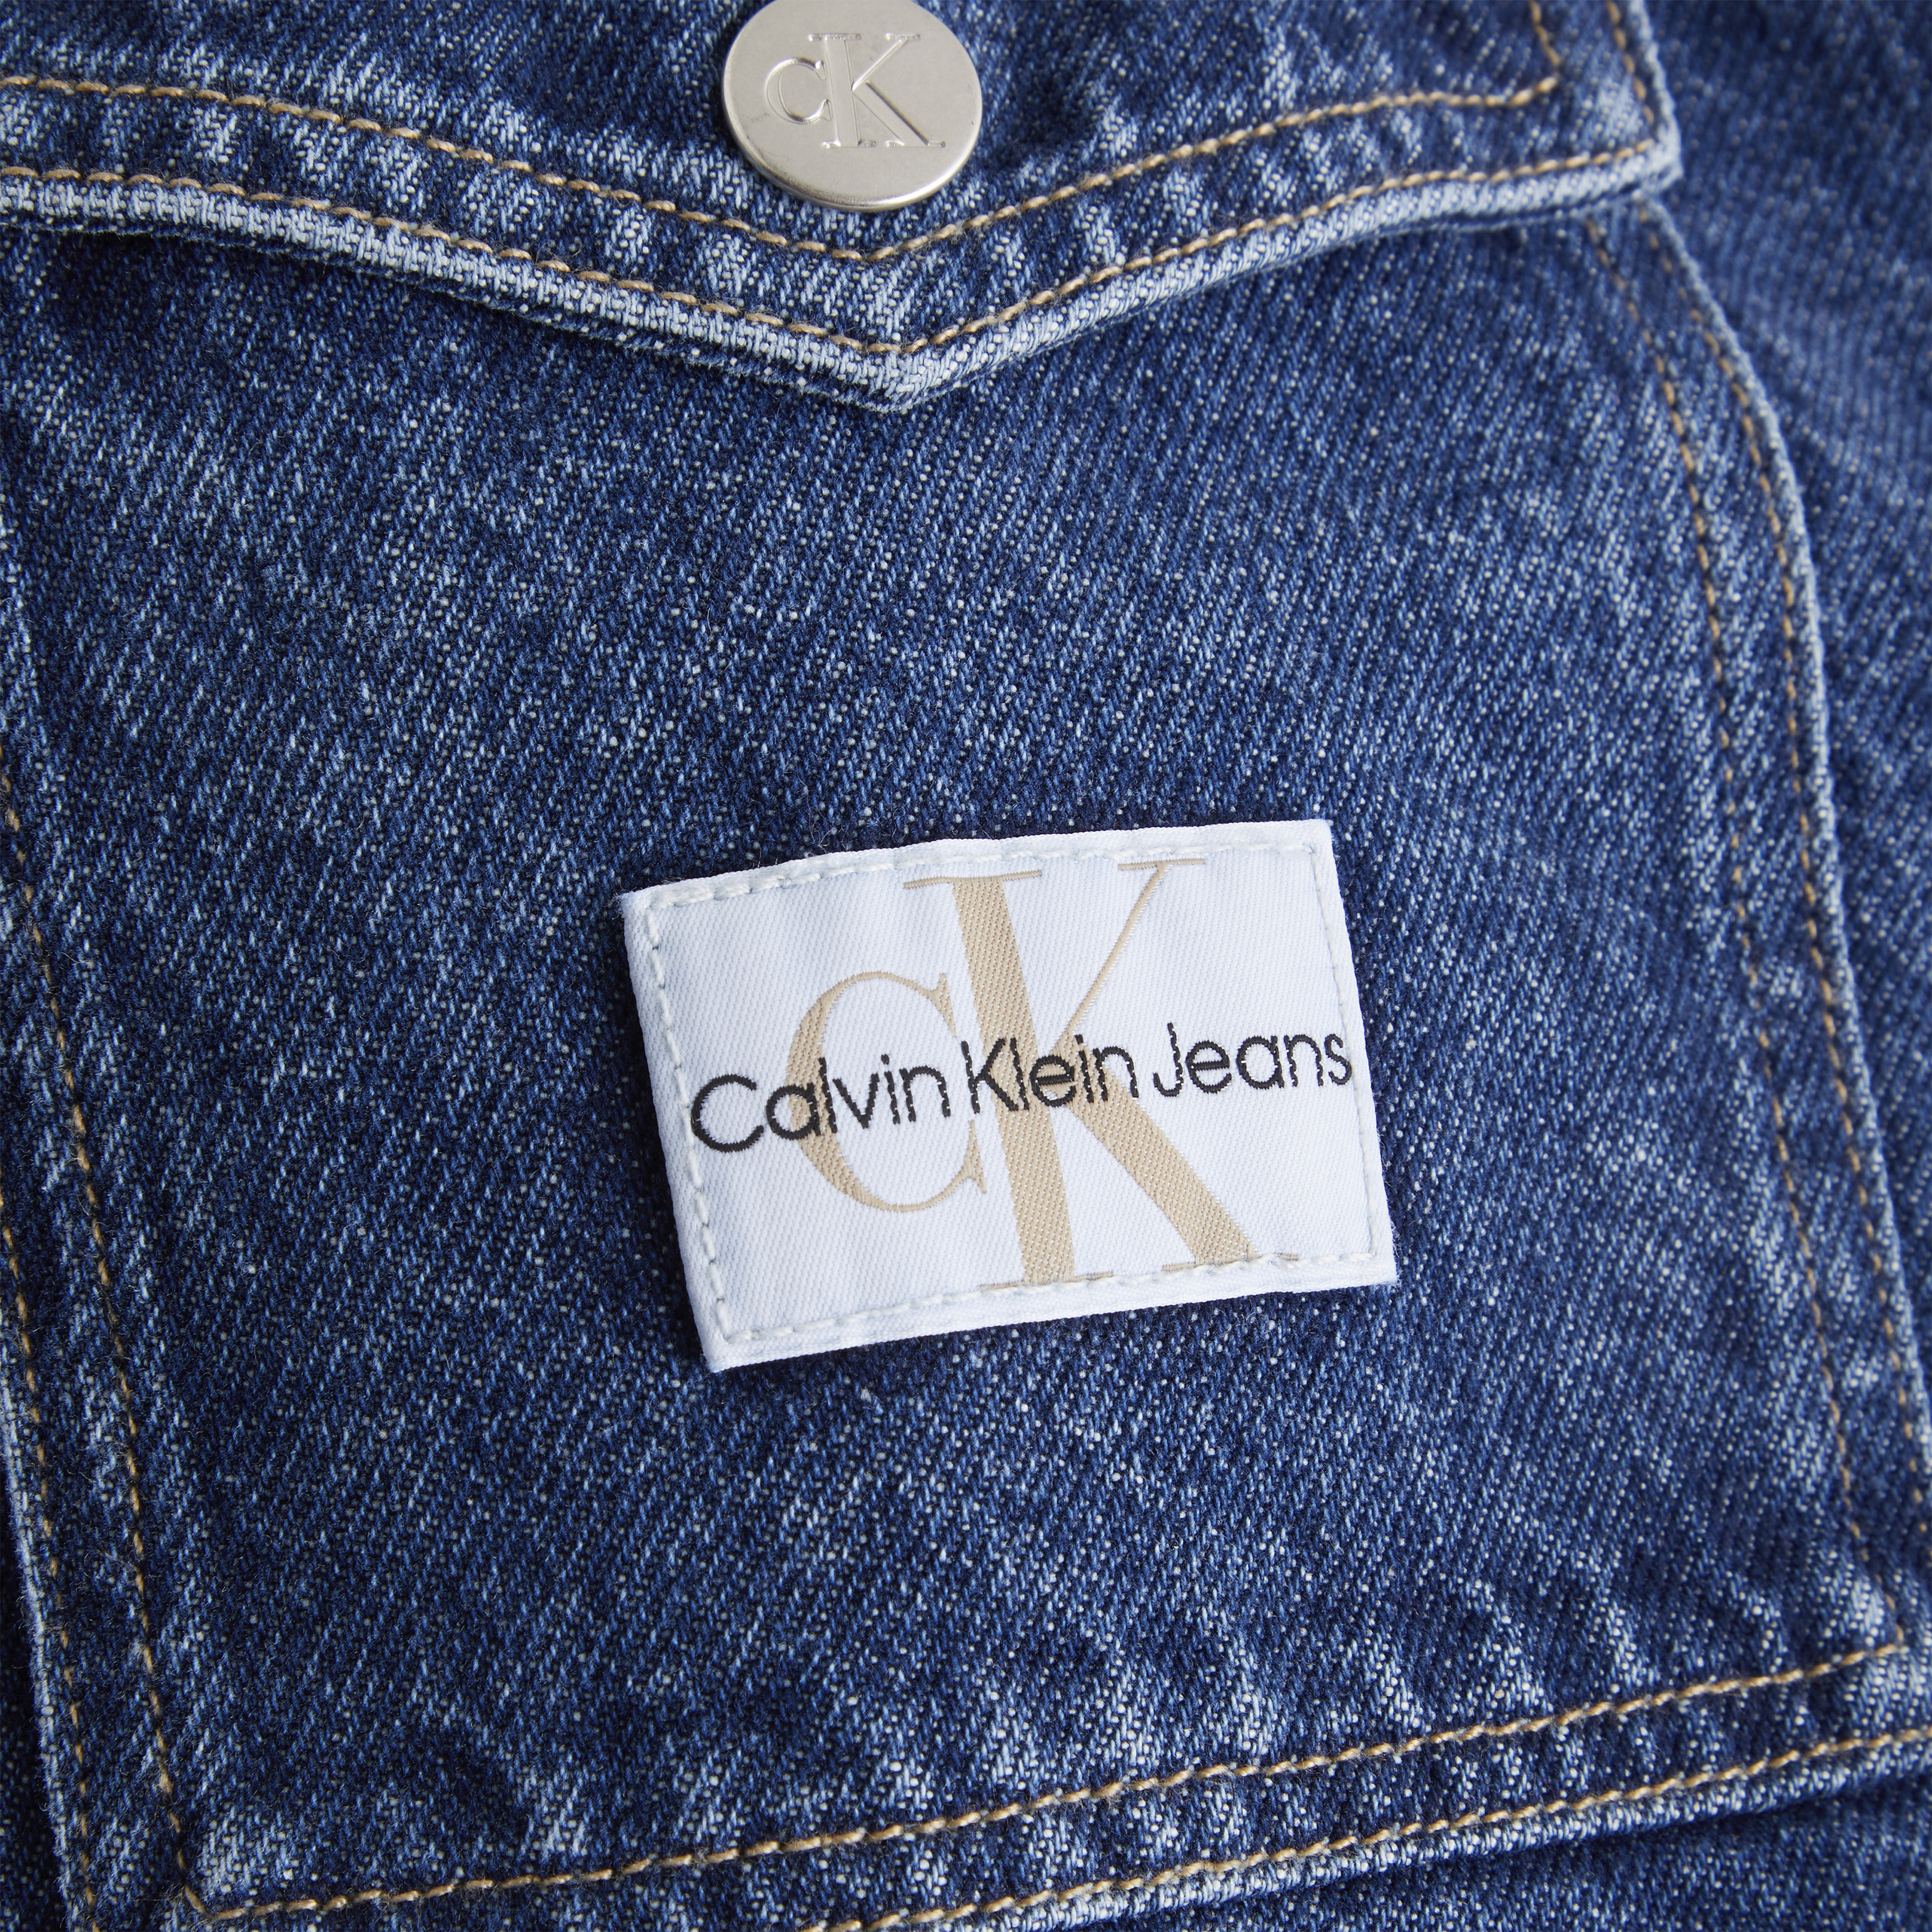 Calvin Klein Jeans - Cropped relaxed-fit jacket in denim, Denim, large image number 2